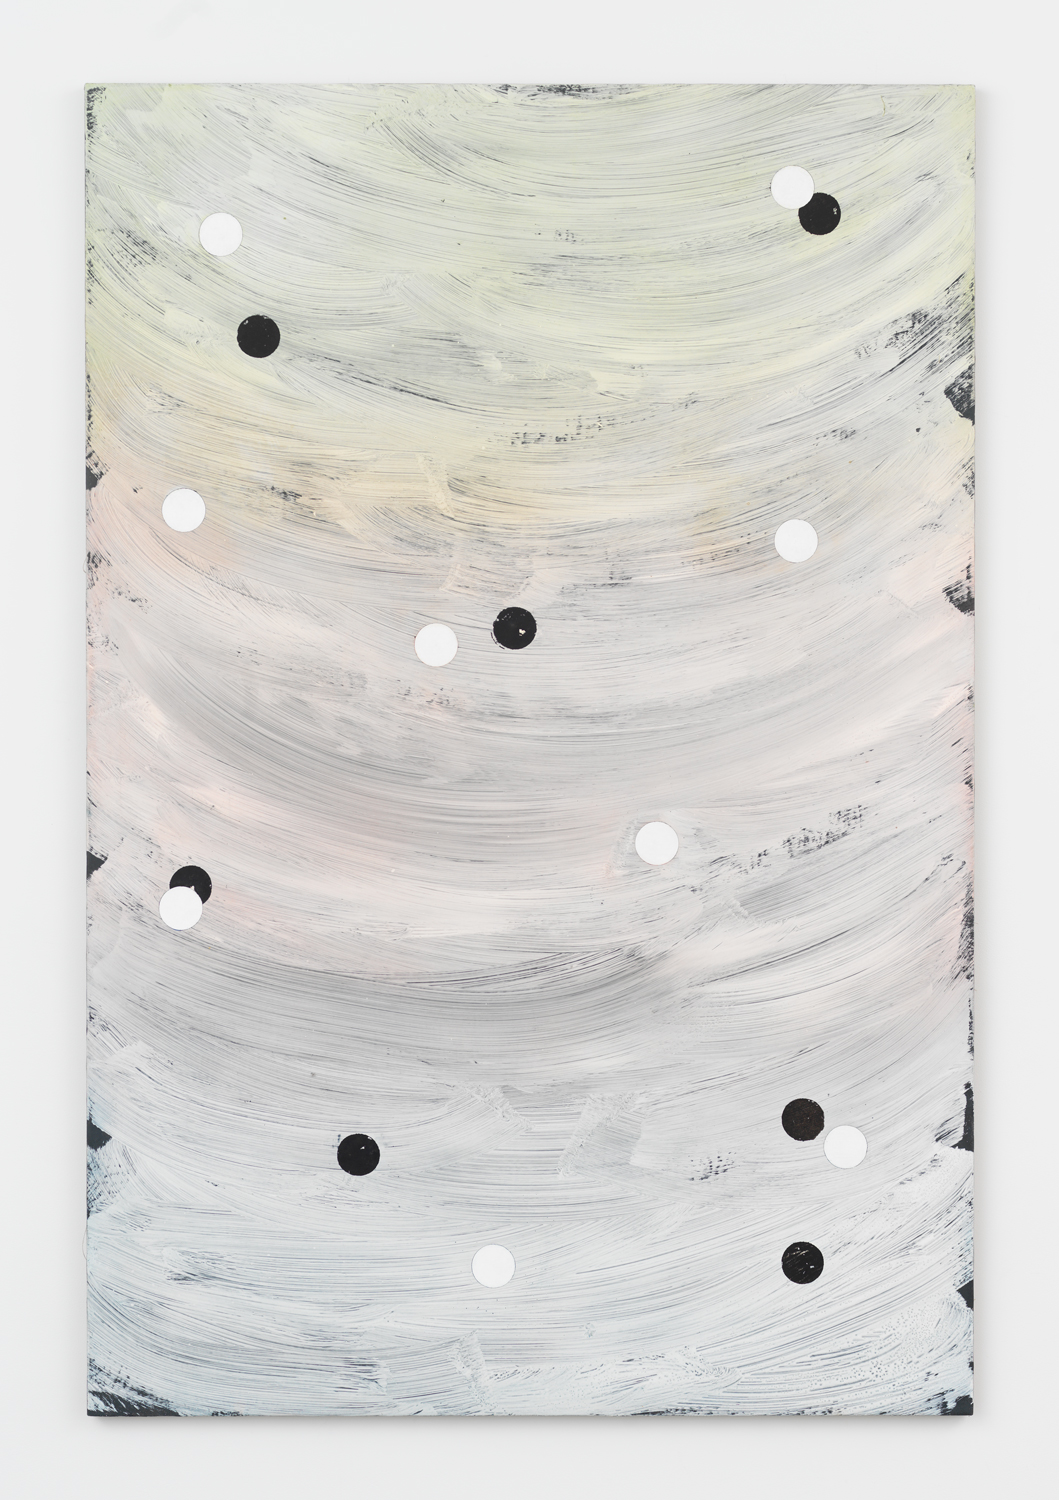 Alex Kwartler, Untitled, 2019, plaster, acrylic, and oil on linen, 72h x 48w in.